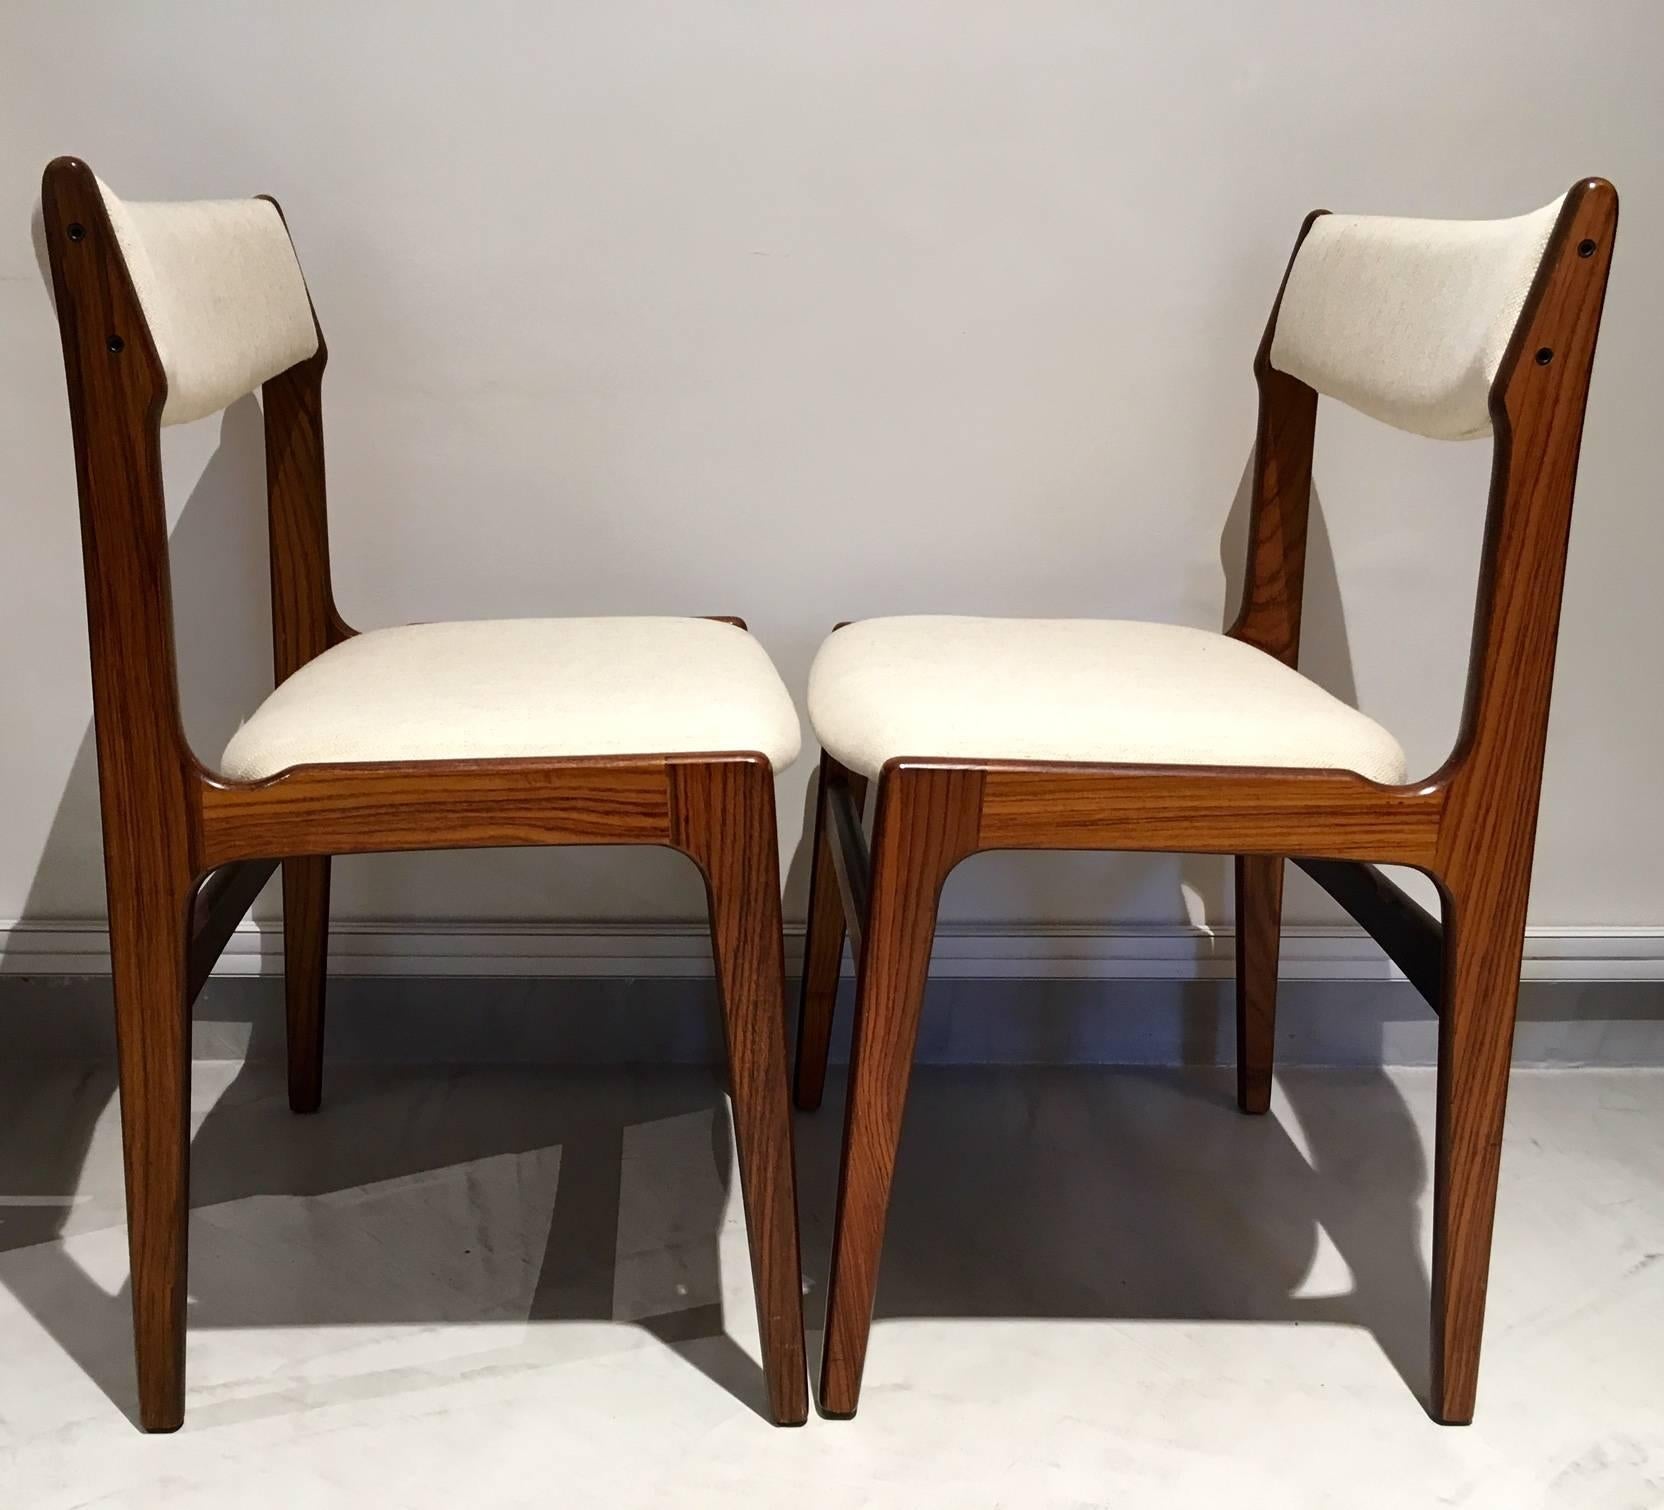 Veneer Set of Six Midcentury Danish Wooden Dining Chairs with White Covers